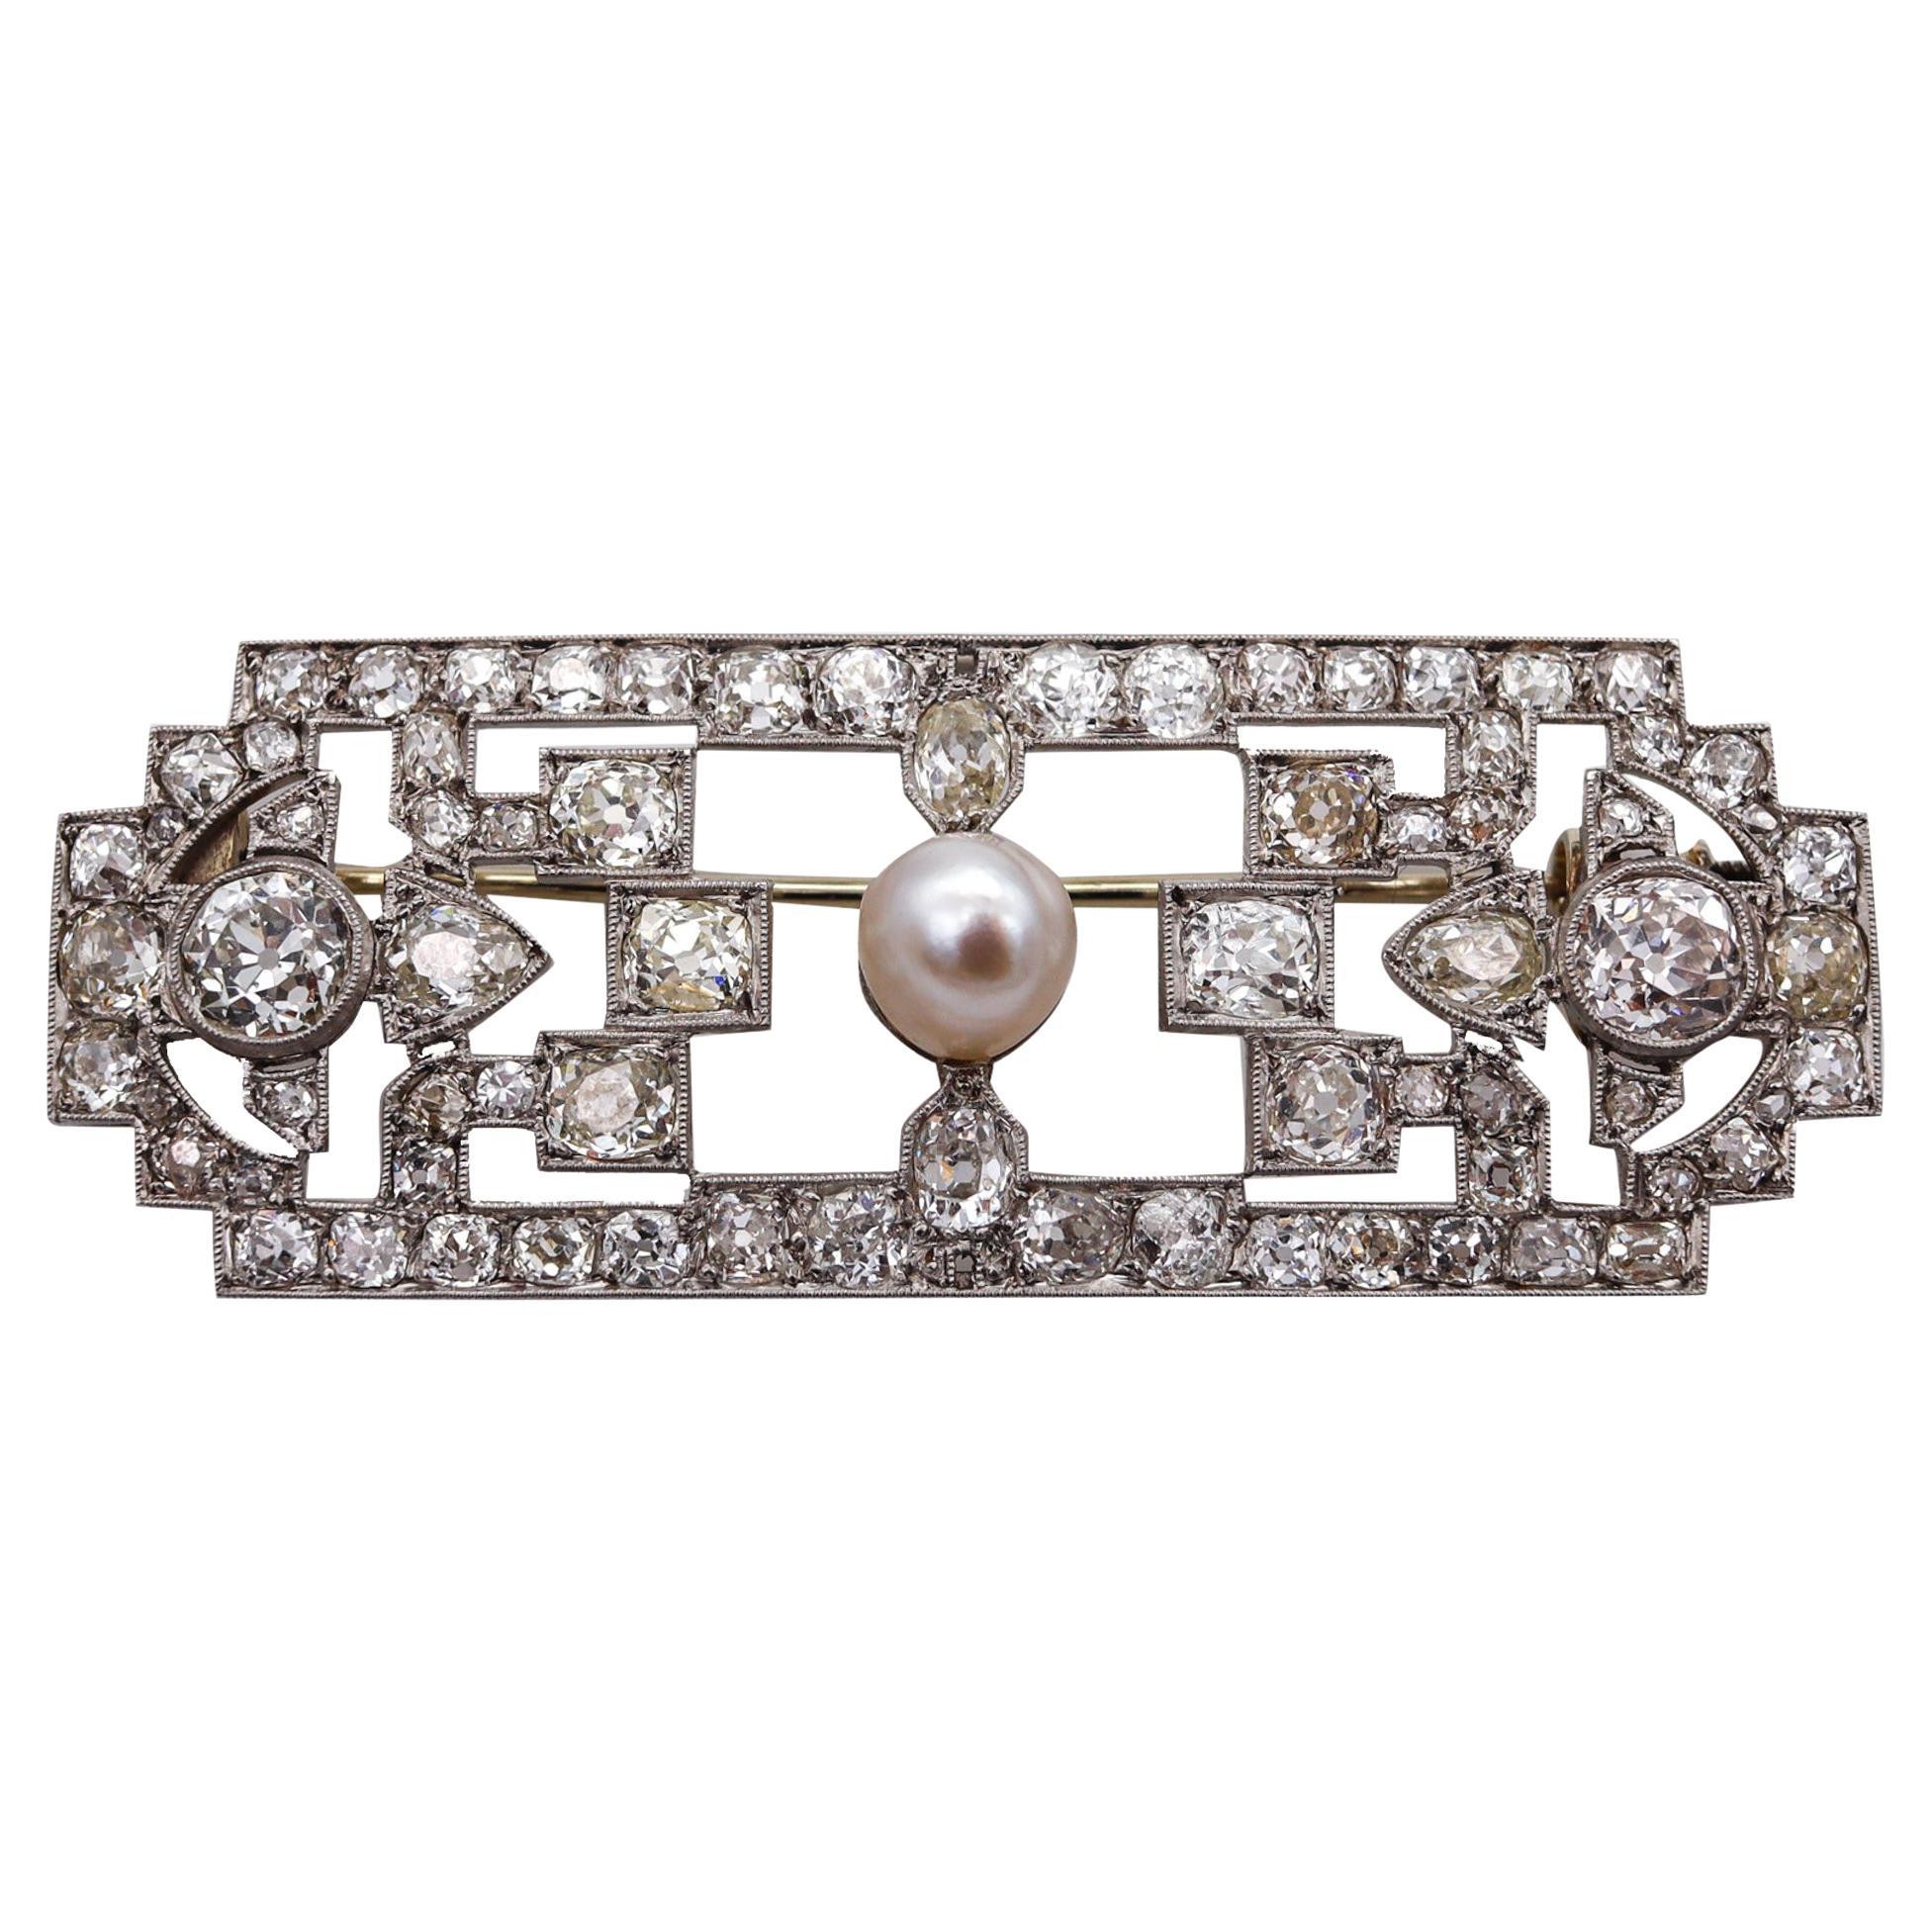 French 1920 Art Deco Geometric Brooch in Platinum with 10.70ctw in Diamonds